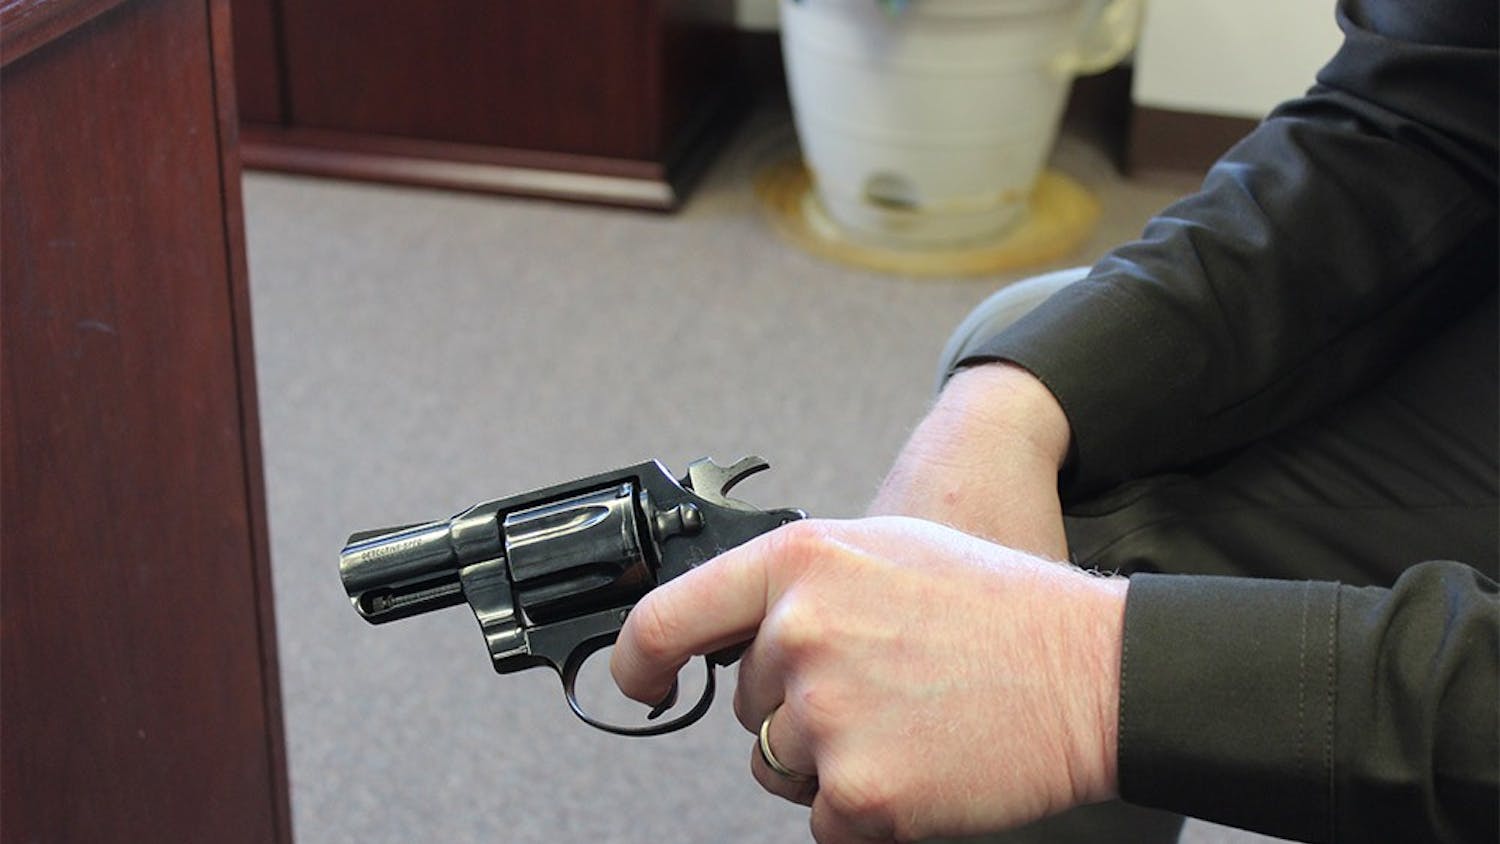 Sheriff Matt Myers holds a .38 caliber pistol, the same type of weapon used by a 6-year-boy who accidently shot his father Sunday in Barthlomew county.